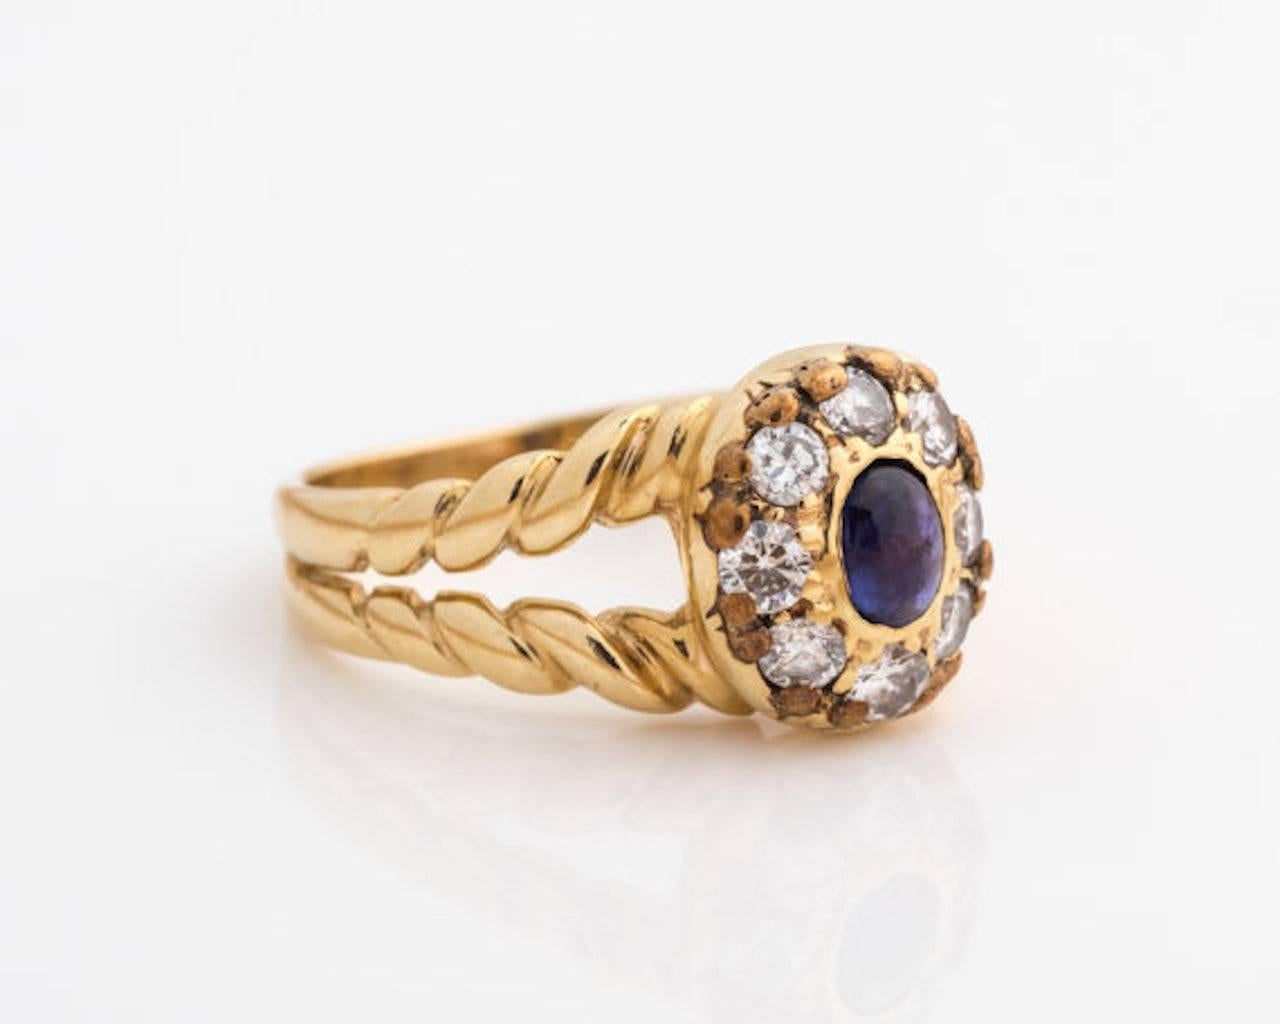 1960s Retro Sapphire, Diamond Halo Ring - 18k Yellow Gold, Sapphire, Diamonds

Features an oval Blue Sapphire center stone with a Diamond Halo. The split shank ring has twisted rope gold band shoulders. The gold rope bands flow into a smooth shank.